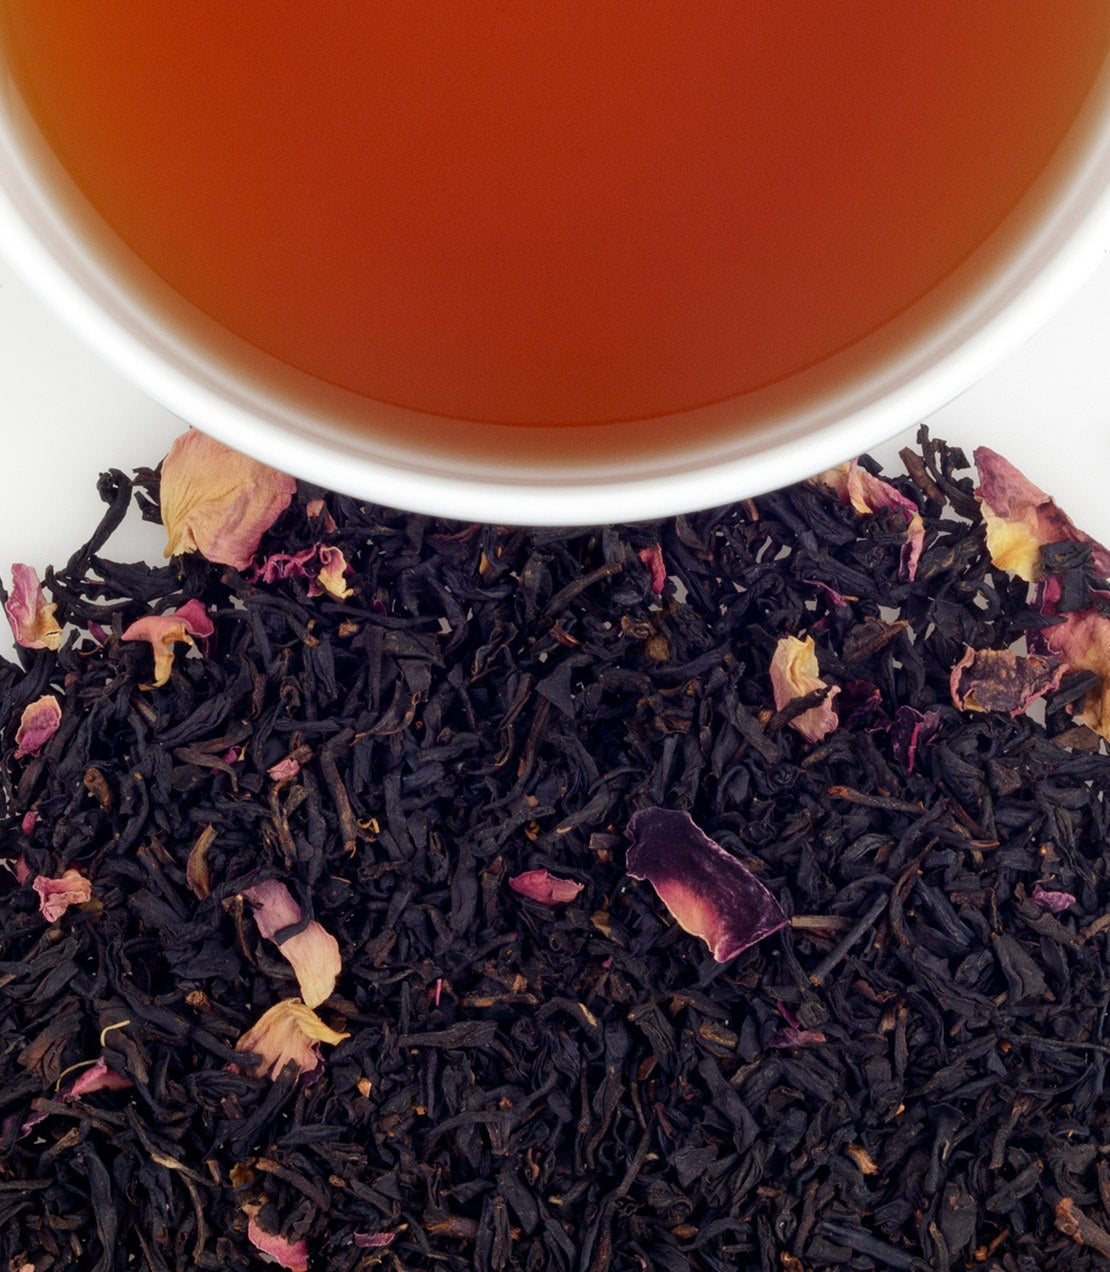 Rose Scented -   - Harney & Sons Fine Teas